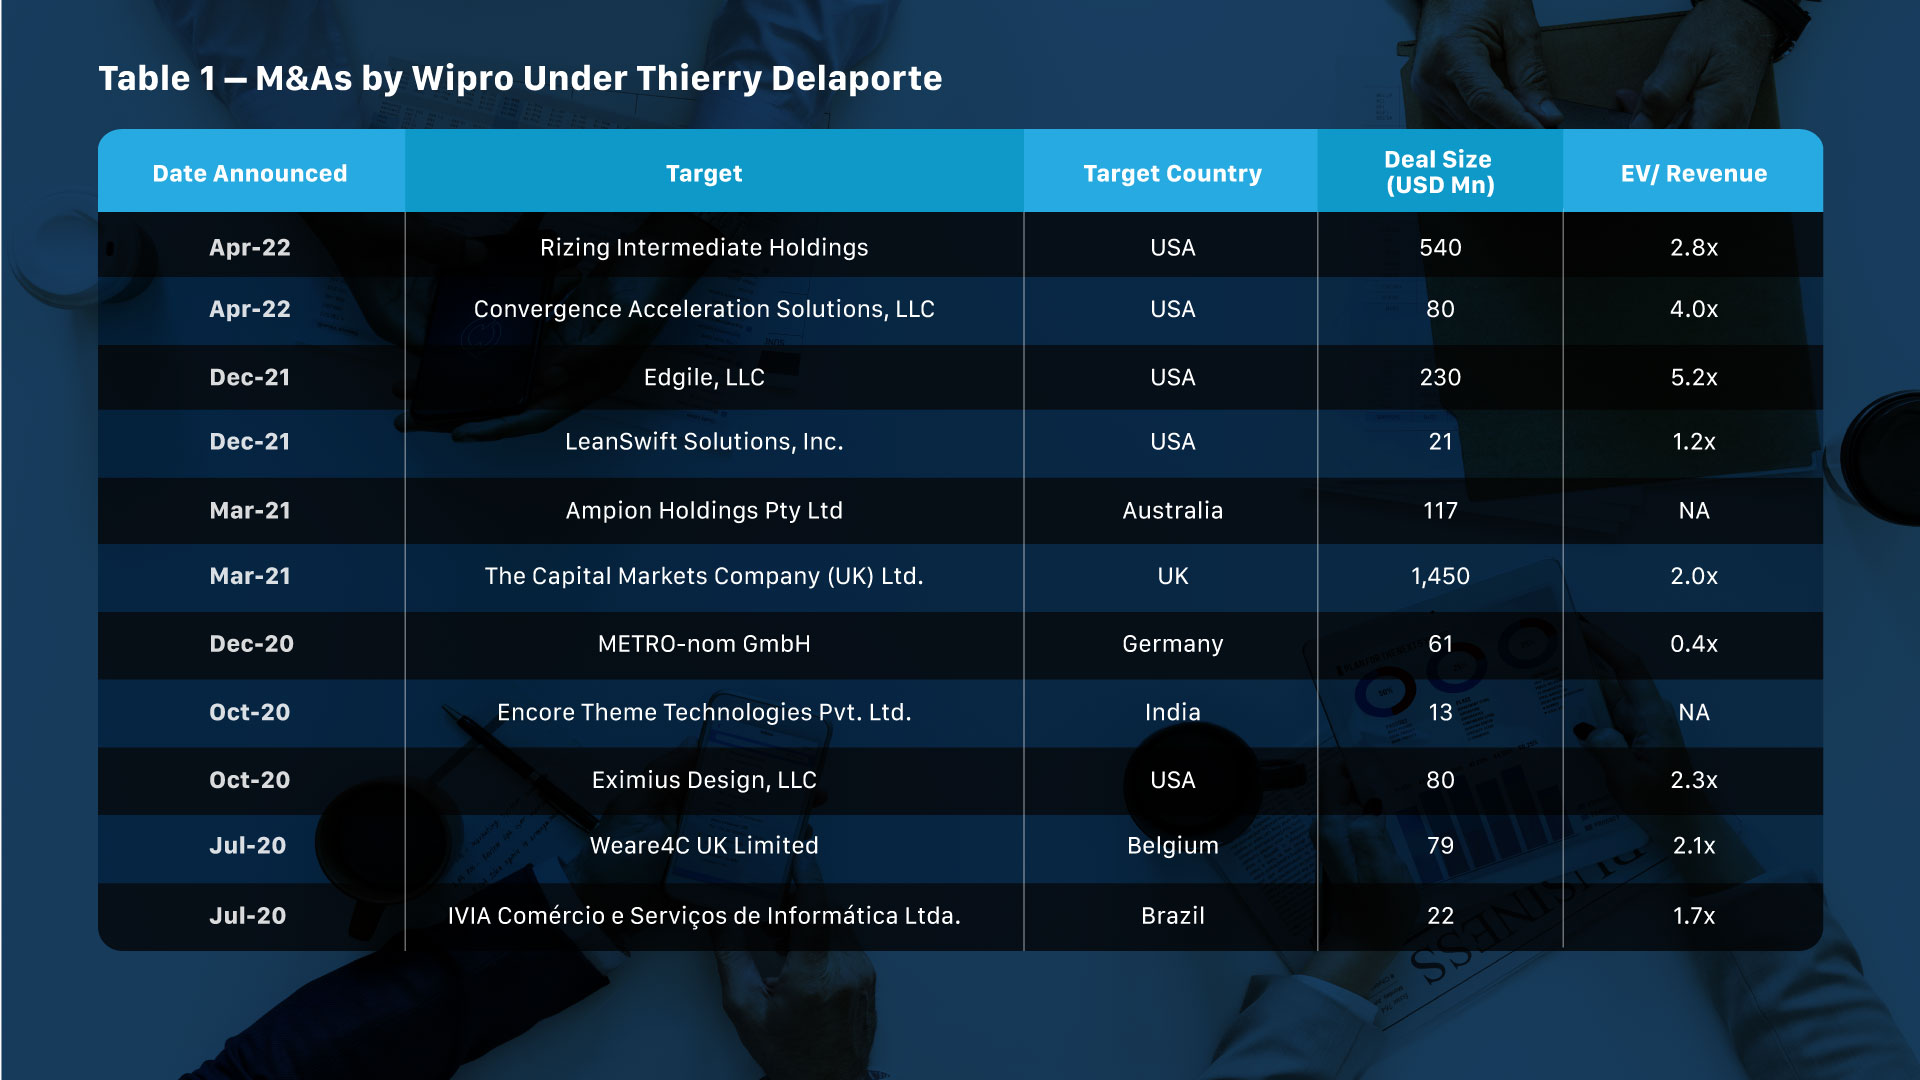 M&A by Wipro under Thierry Delaporte